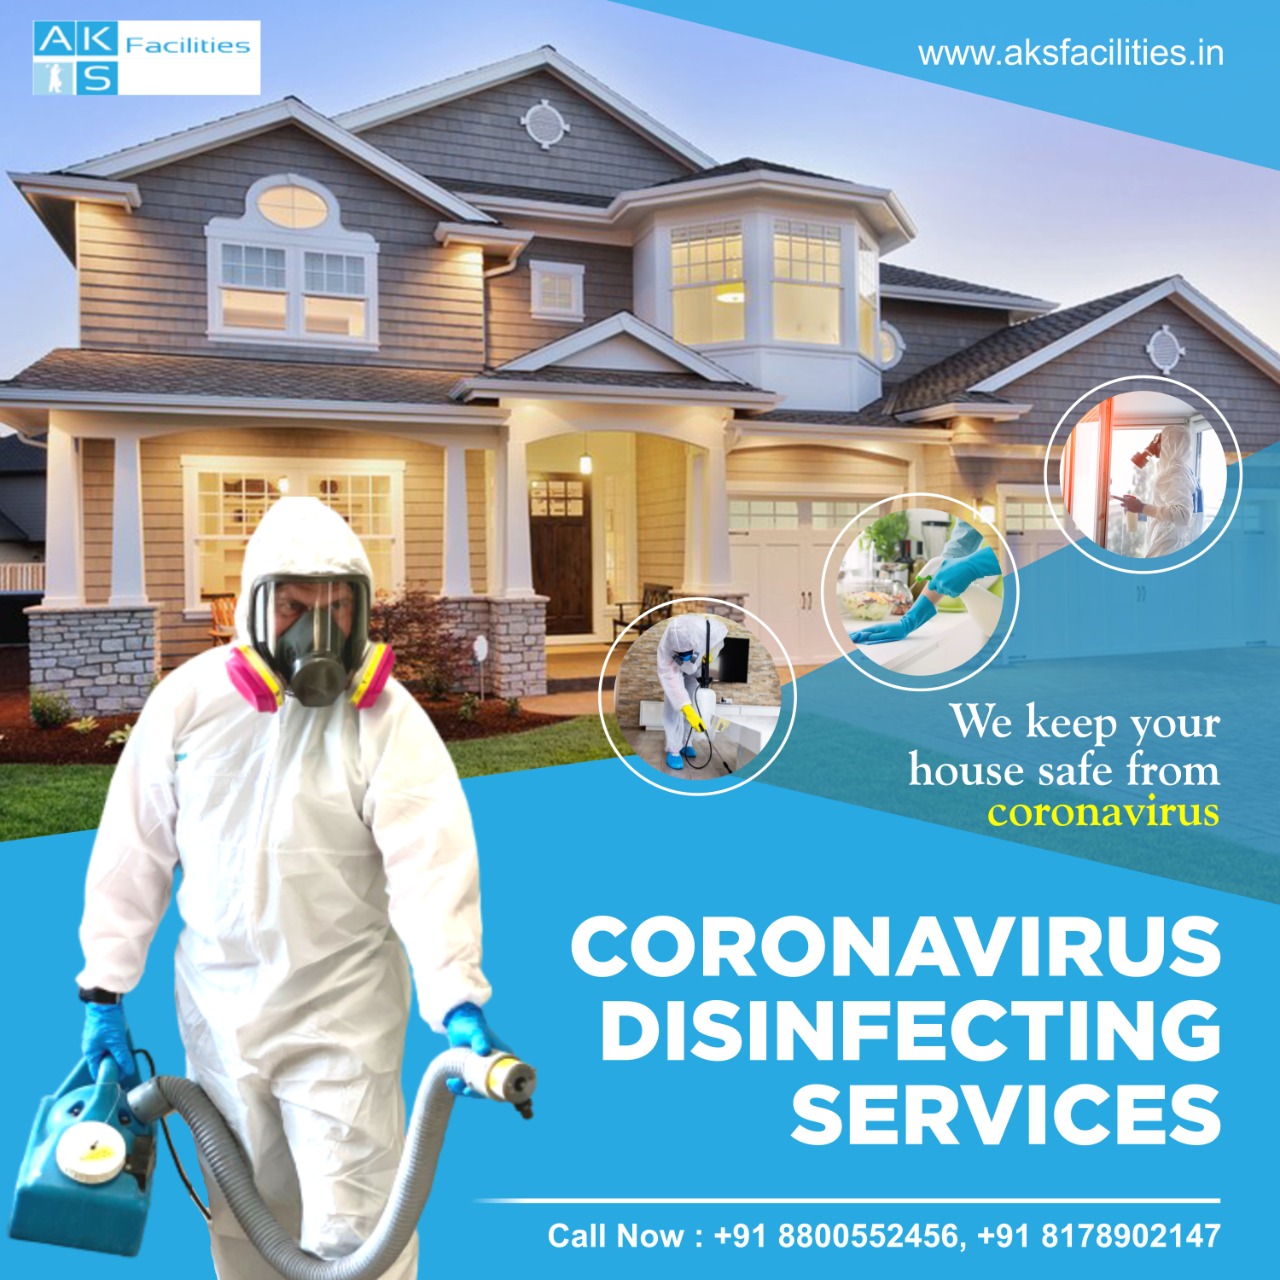 Home Disinfection and Sanitization services, Office sanitization services in Gurgaon